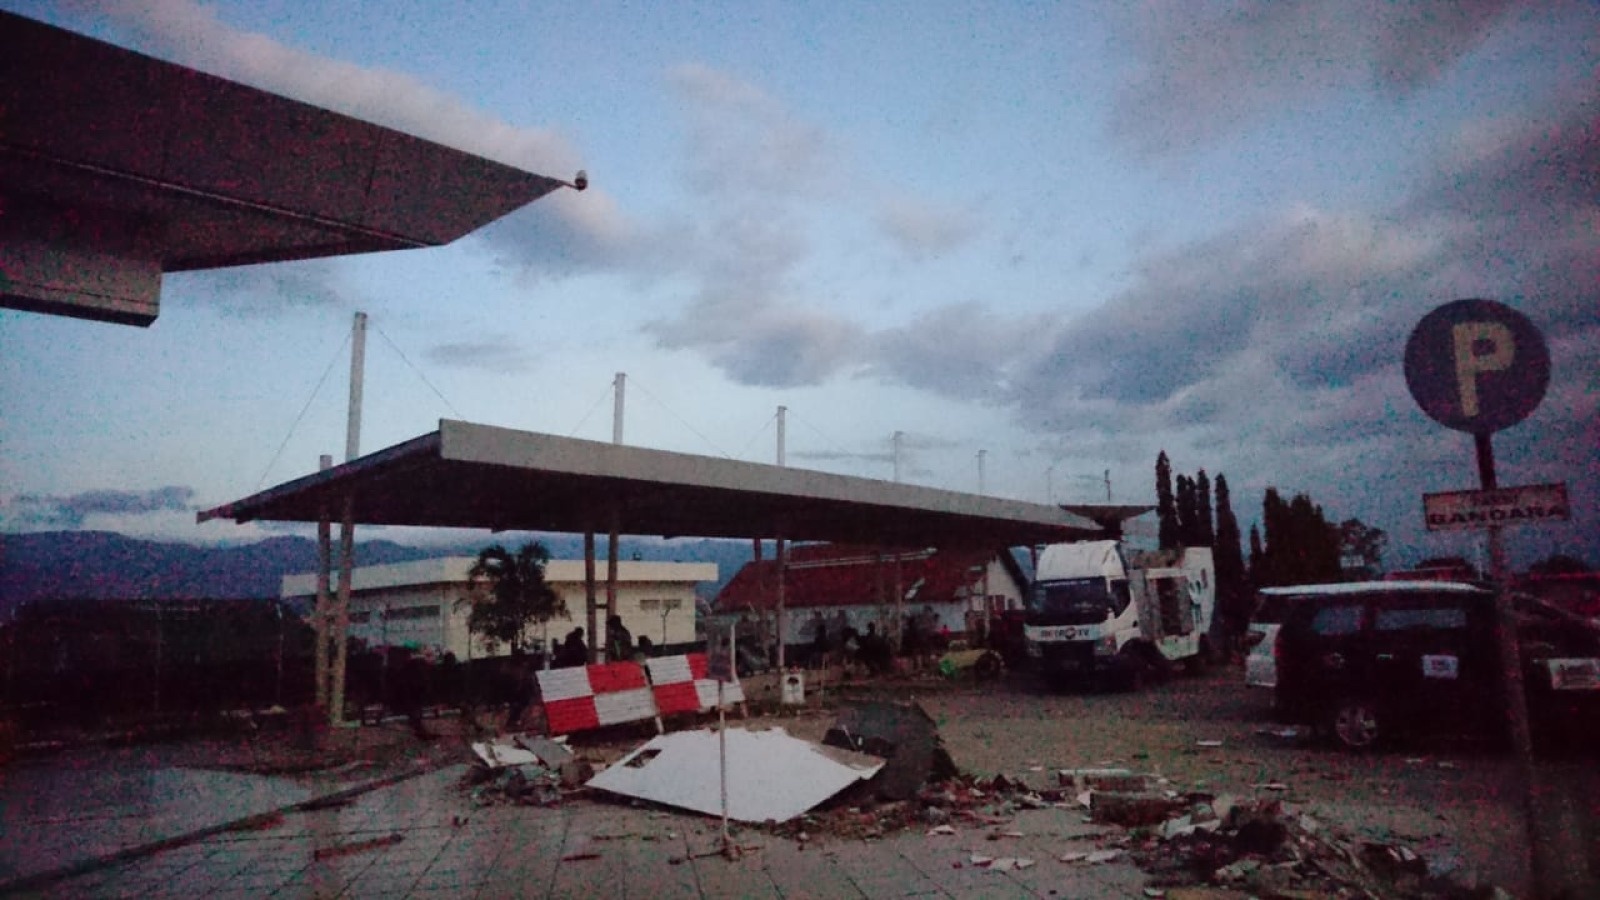 Destructions in Palu town, Sulawesi island. CIS-Timor, HI partners, are assessing the needs of populations severely hit by the earthquake and tsunami.